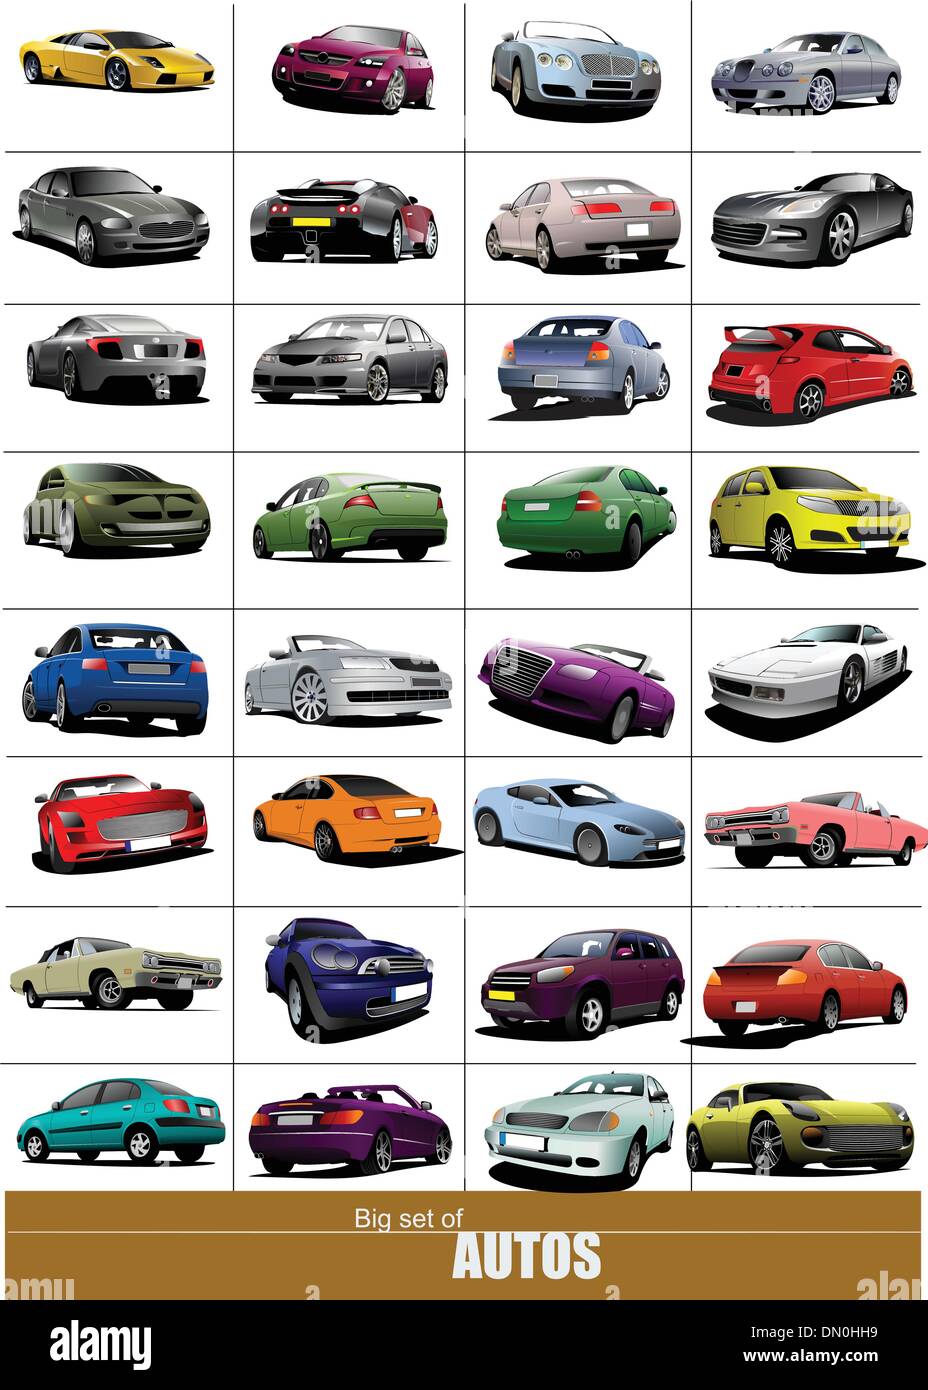 Big set of 32 kinds cars on the road. Vector illustration Stock Vector